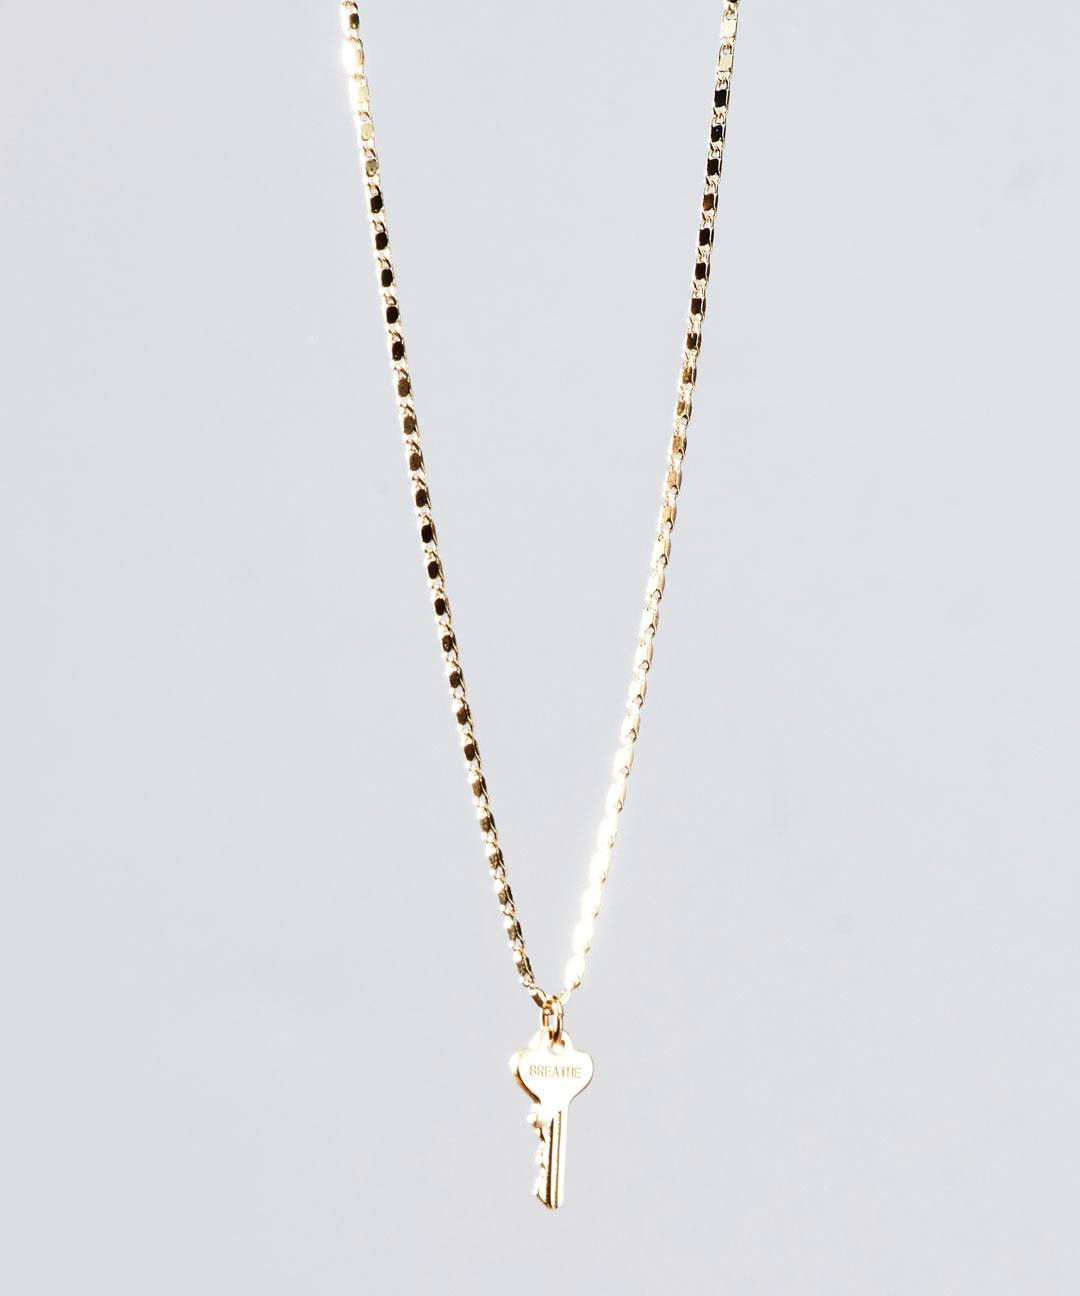 Gold Petite Key Necklace Necklaces The Giving Keys BREATHE GOLD